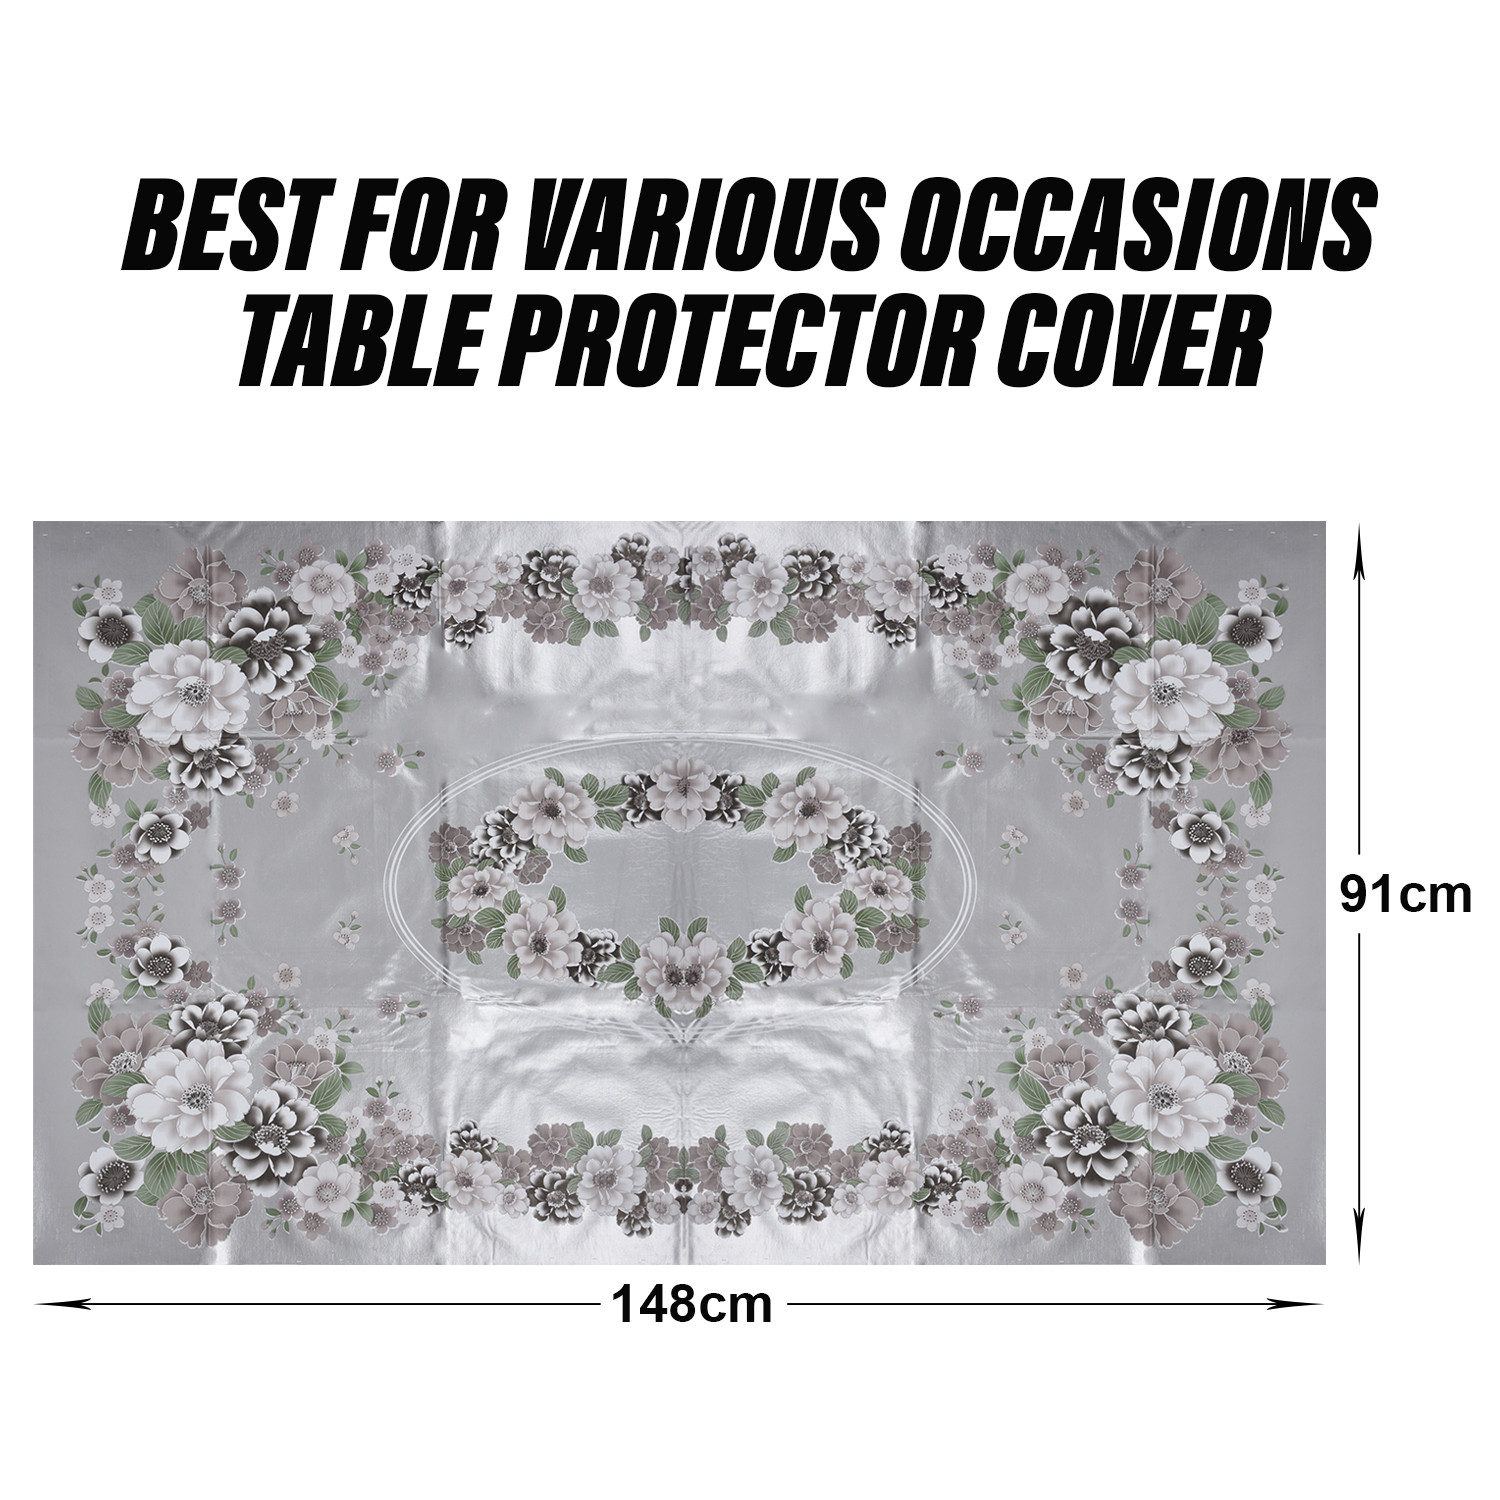 Kuber Industries Center Table Cover | Sigma PVC Flower Center Table Cover | Luxurious Table Protector Cover Without Lace | 40x60 Inch | Silver